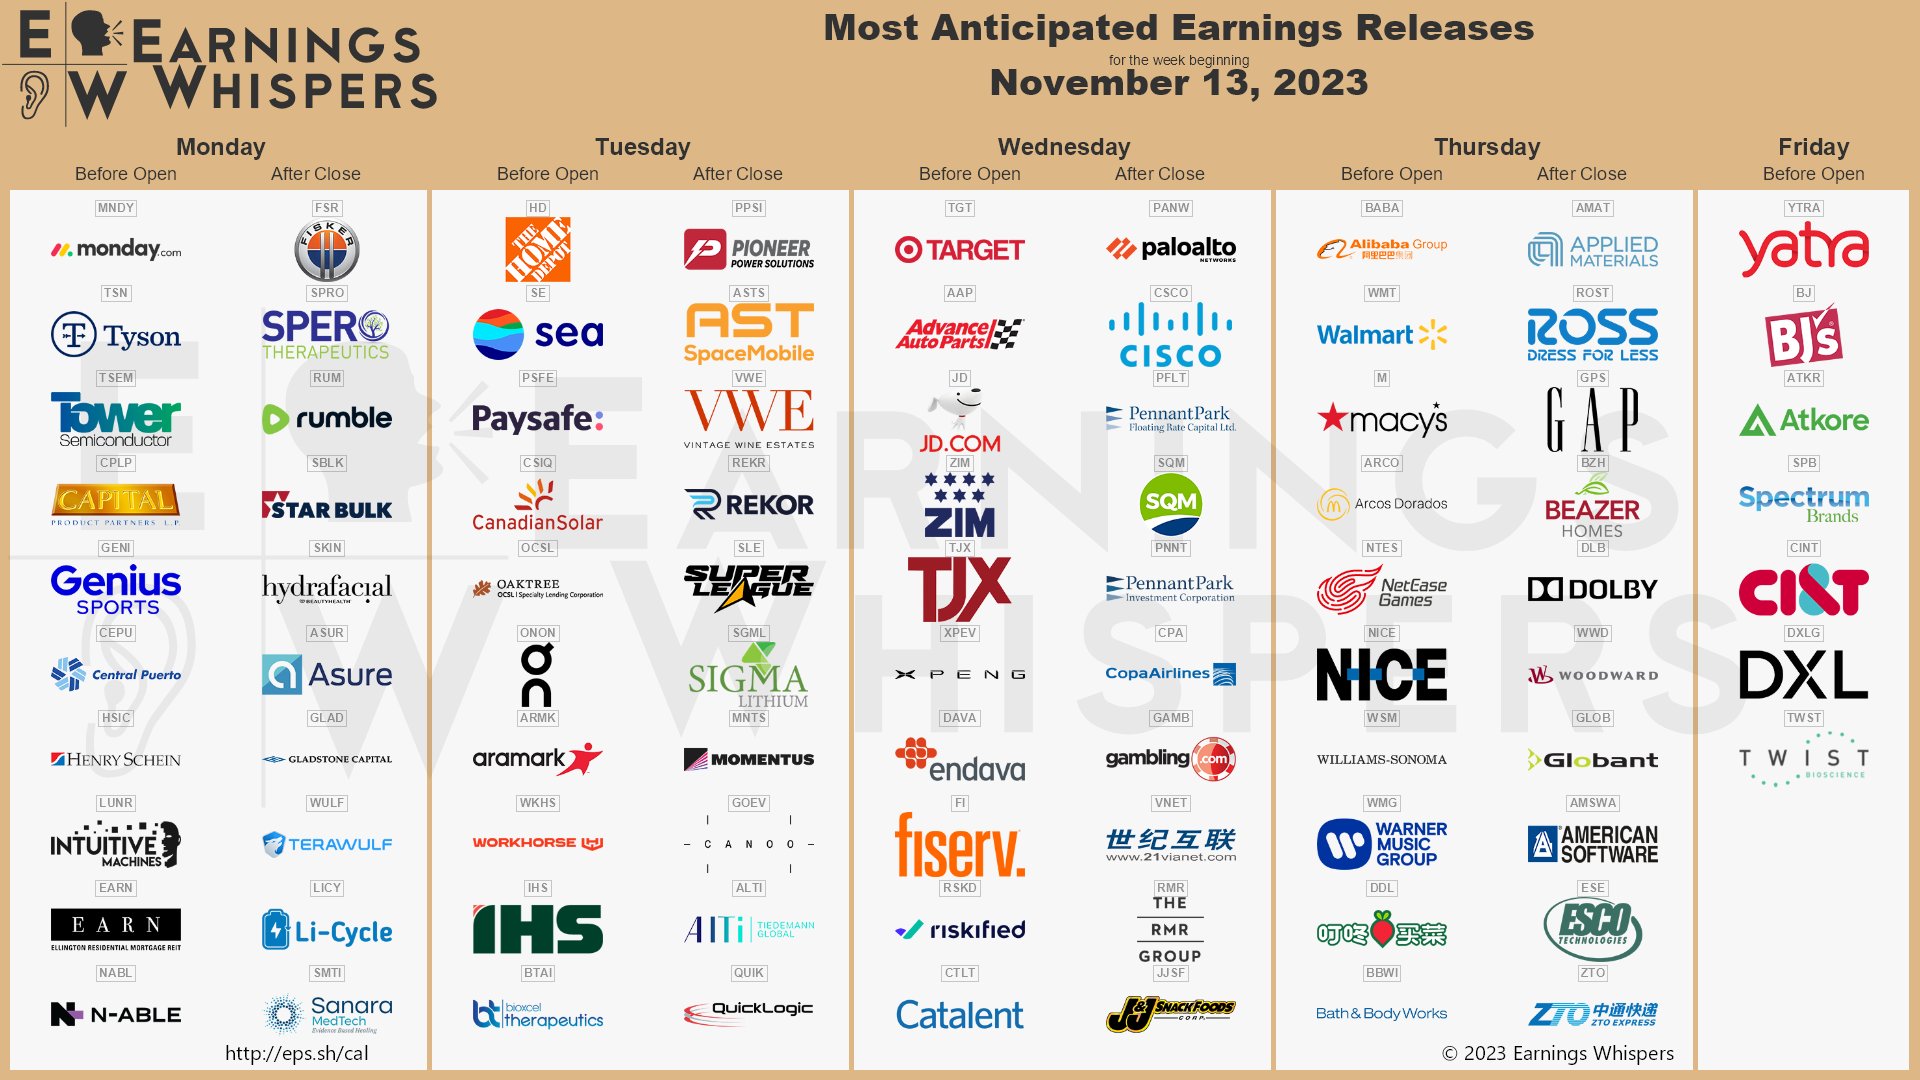 The most anticipated earnings releases for the week of November 13, 2023 are Palo Alto Networks #PANW, Fisker #FSR, Alibaba #BABA, Home Depot #HD, Walmart #WMT, Target #TGT, Cisco #CSCO, Applied Materials #AMAT, monday.com #MNDY, and Yatra Online #YTRA.